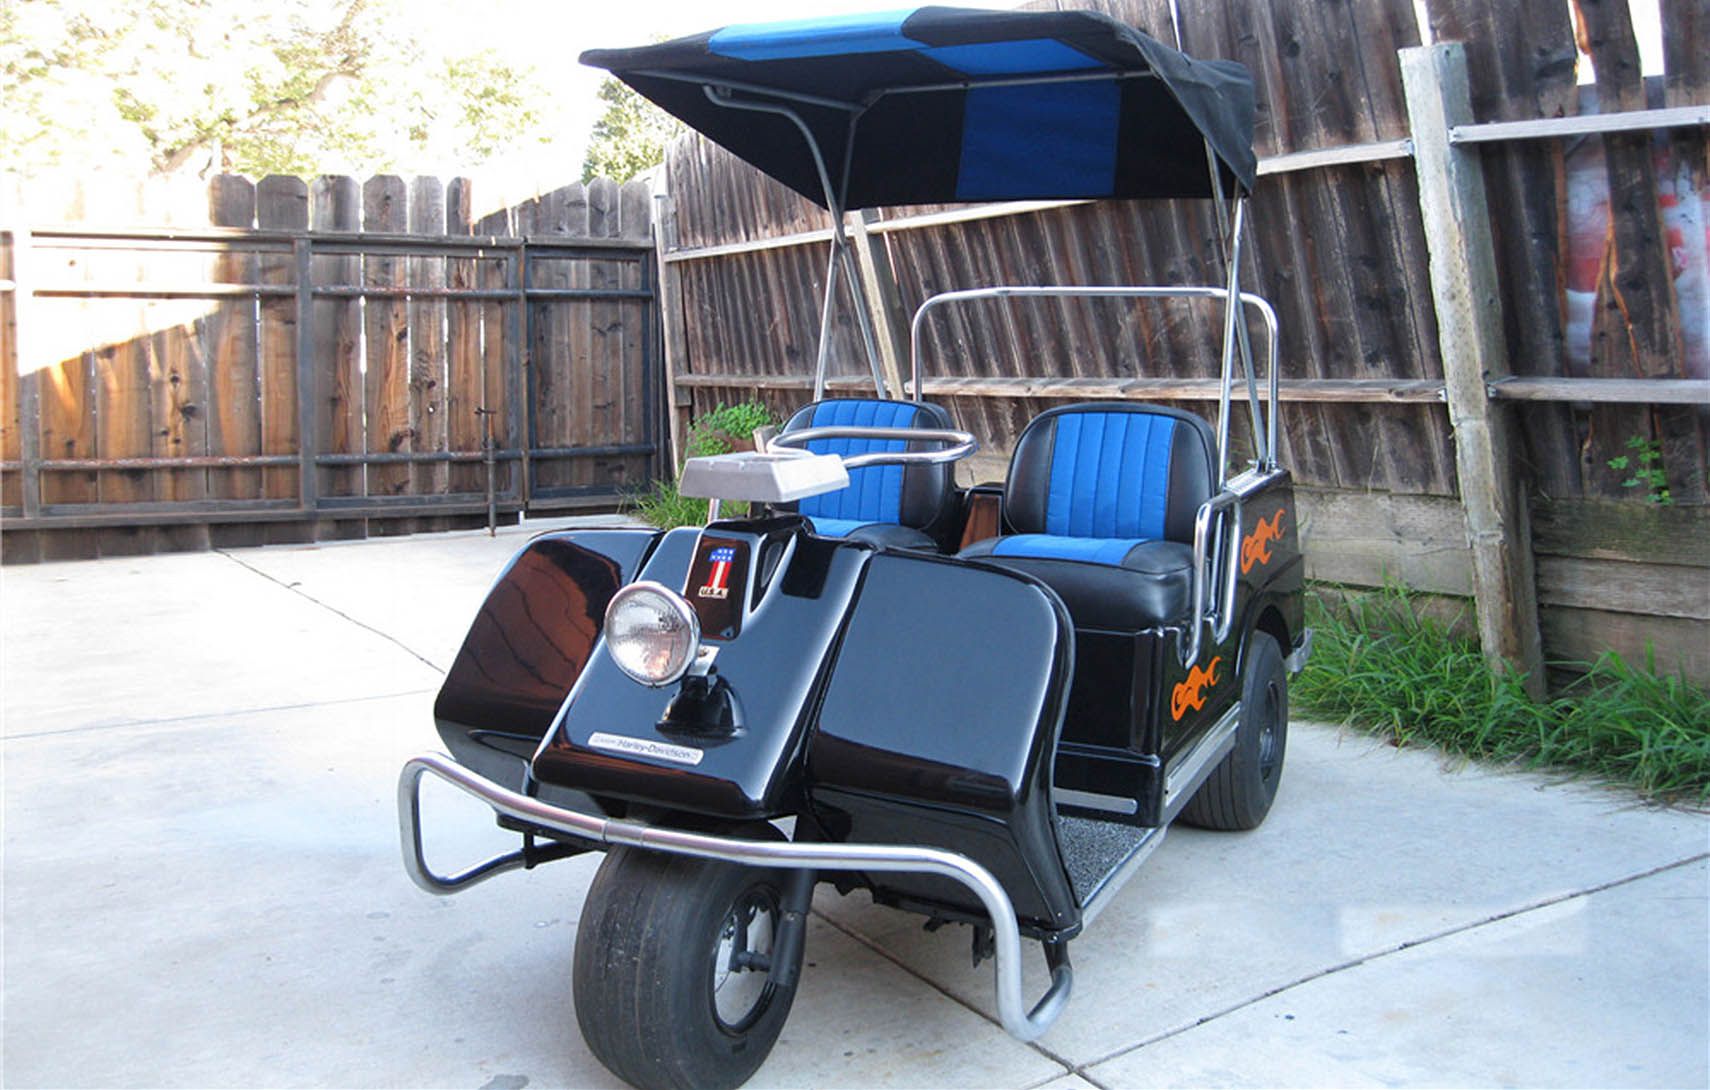 In 1982, The Harley-Davidson Golf Cart Division Was Sold Off To Columbia Parcar